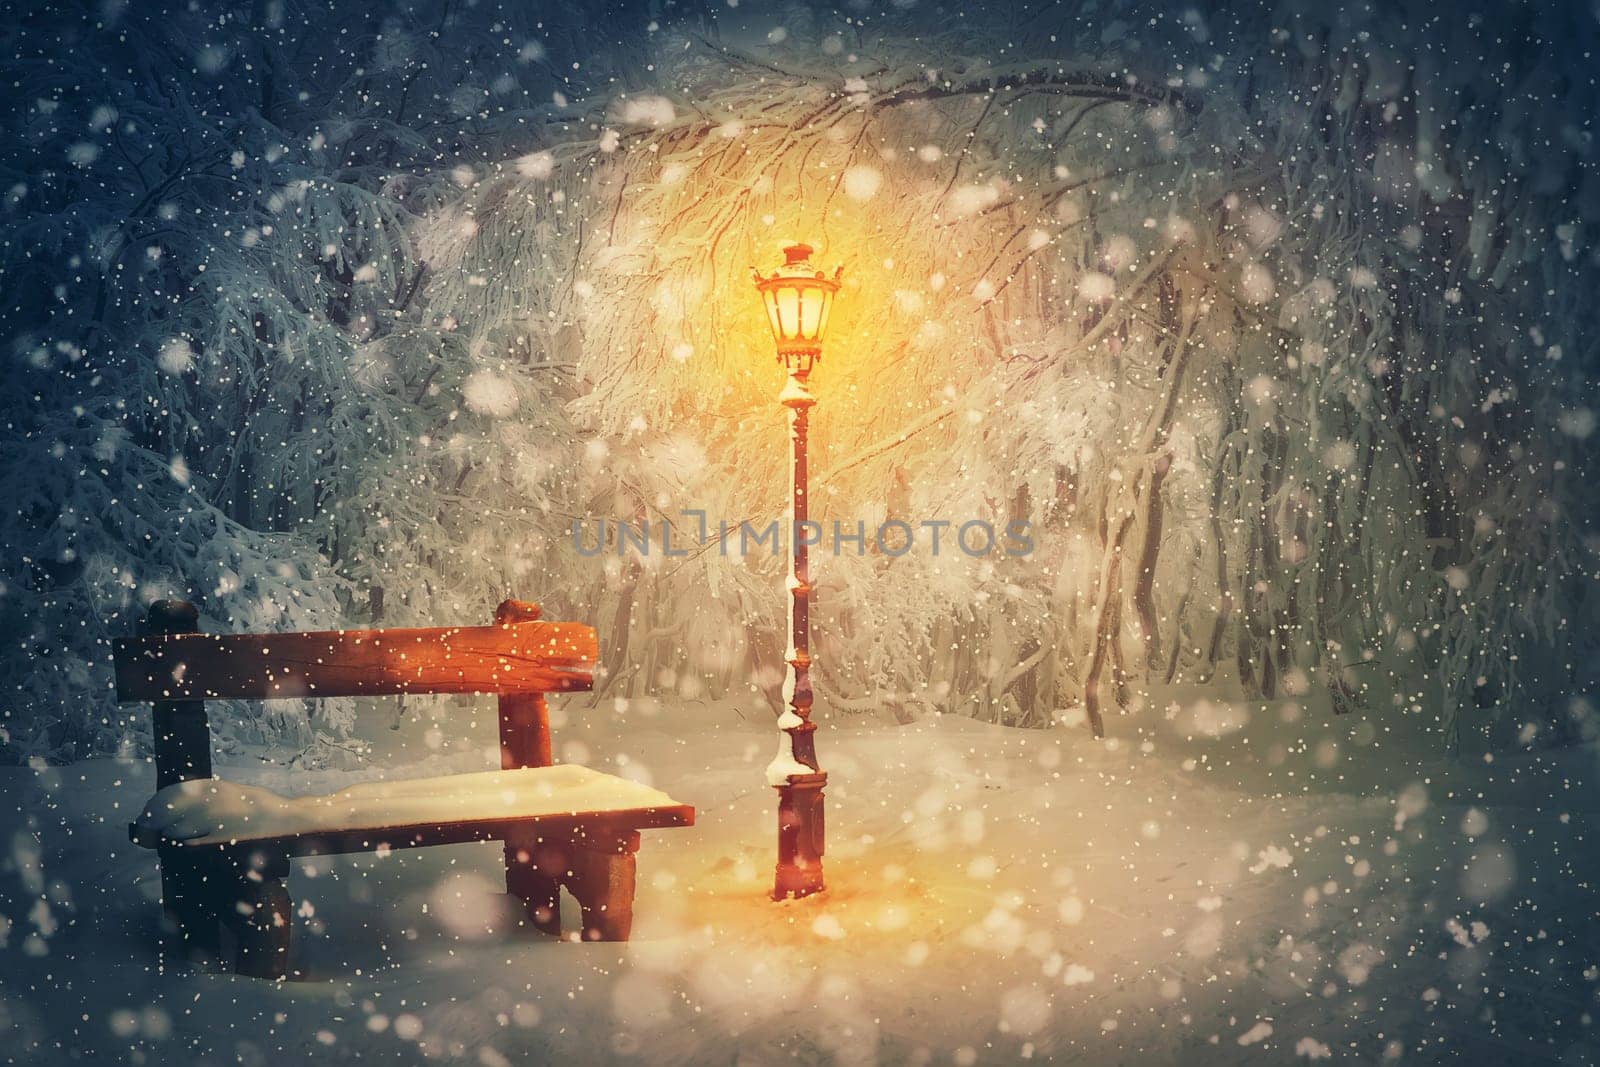 Wintertime night scene in the park. Shining street lamp near a wooden bench covered with snow. Wonderful winter holidays seasonal background. Christmas Eve and New year magic Noel atmosphere by psychoshadow